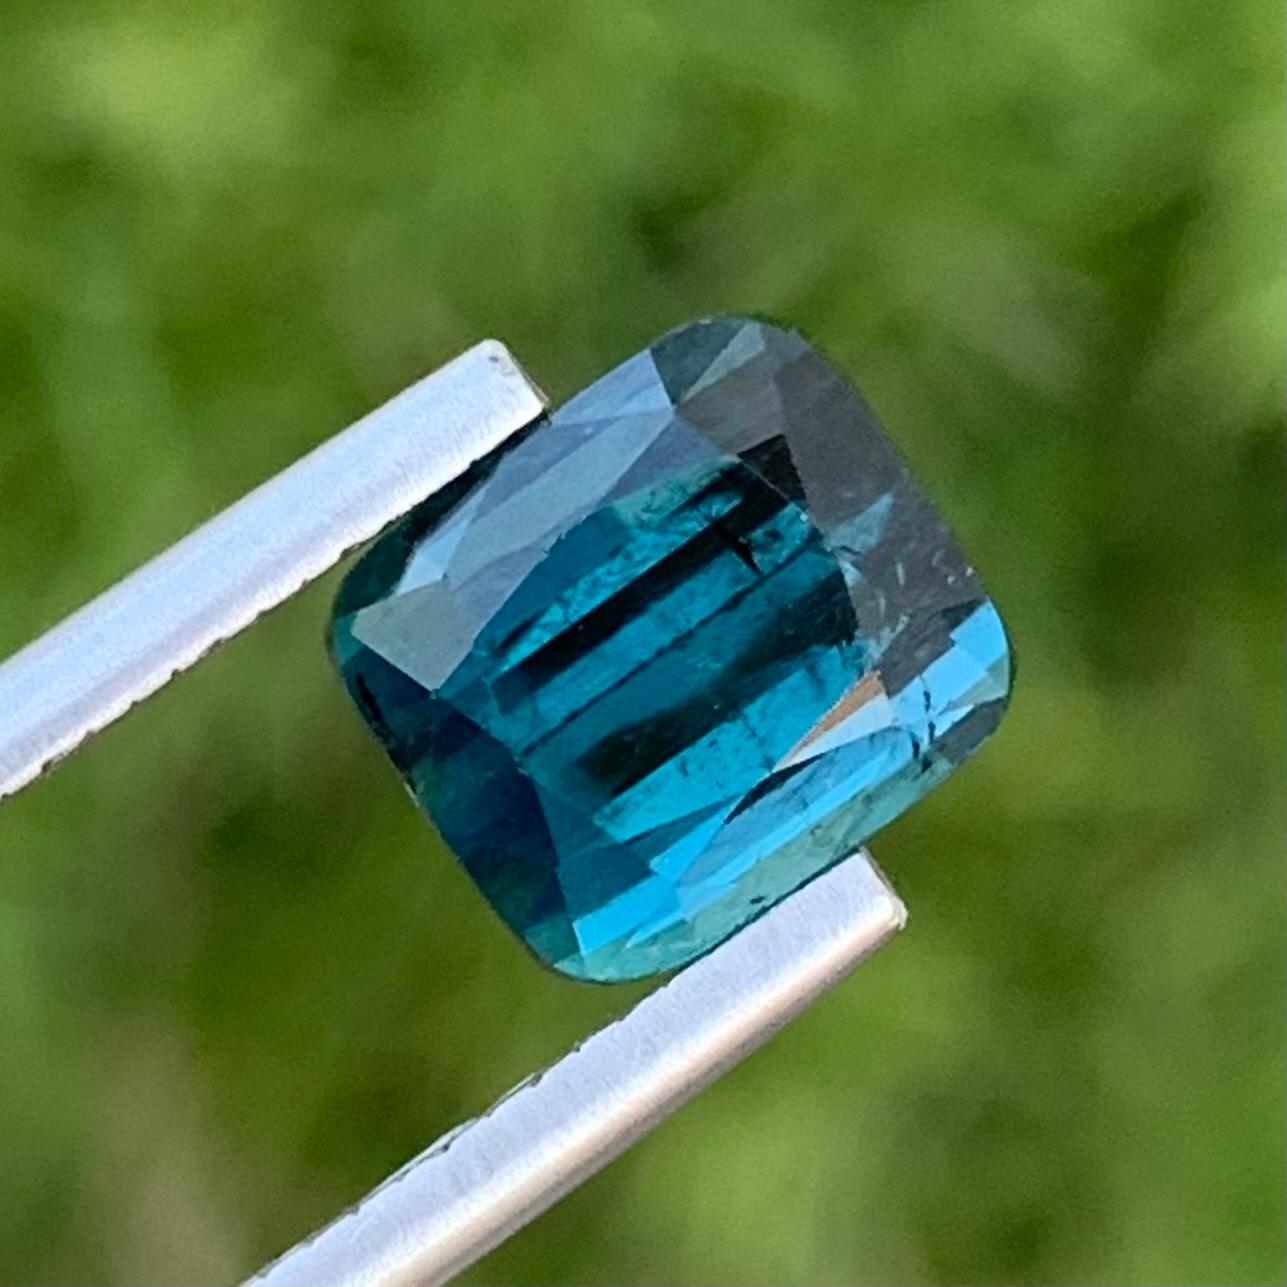 Loose Indicolite Tourmaline 
Weight: 3.10 Carats 
Dimension: 8.4 x 7.5 x 5.6 Mm
Colour: Ink Blue
Origin: Kunar, Afghanistan 
Treatment: Non 
Certificate: On Demand 

Indicolite is a captivating variety of tourmaline, renowned for its exquisite blue